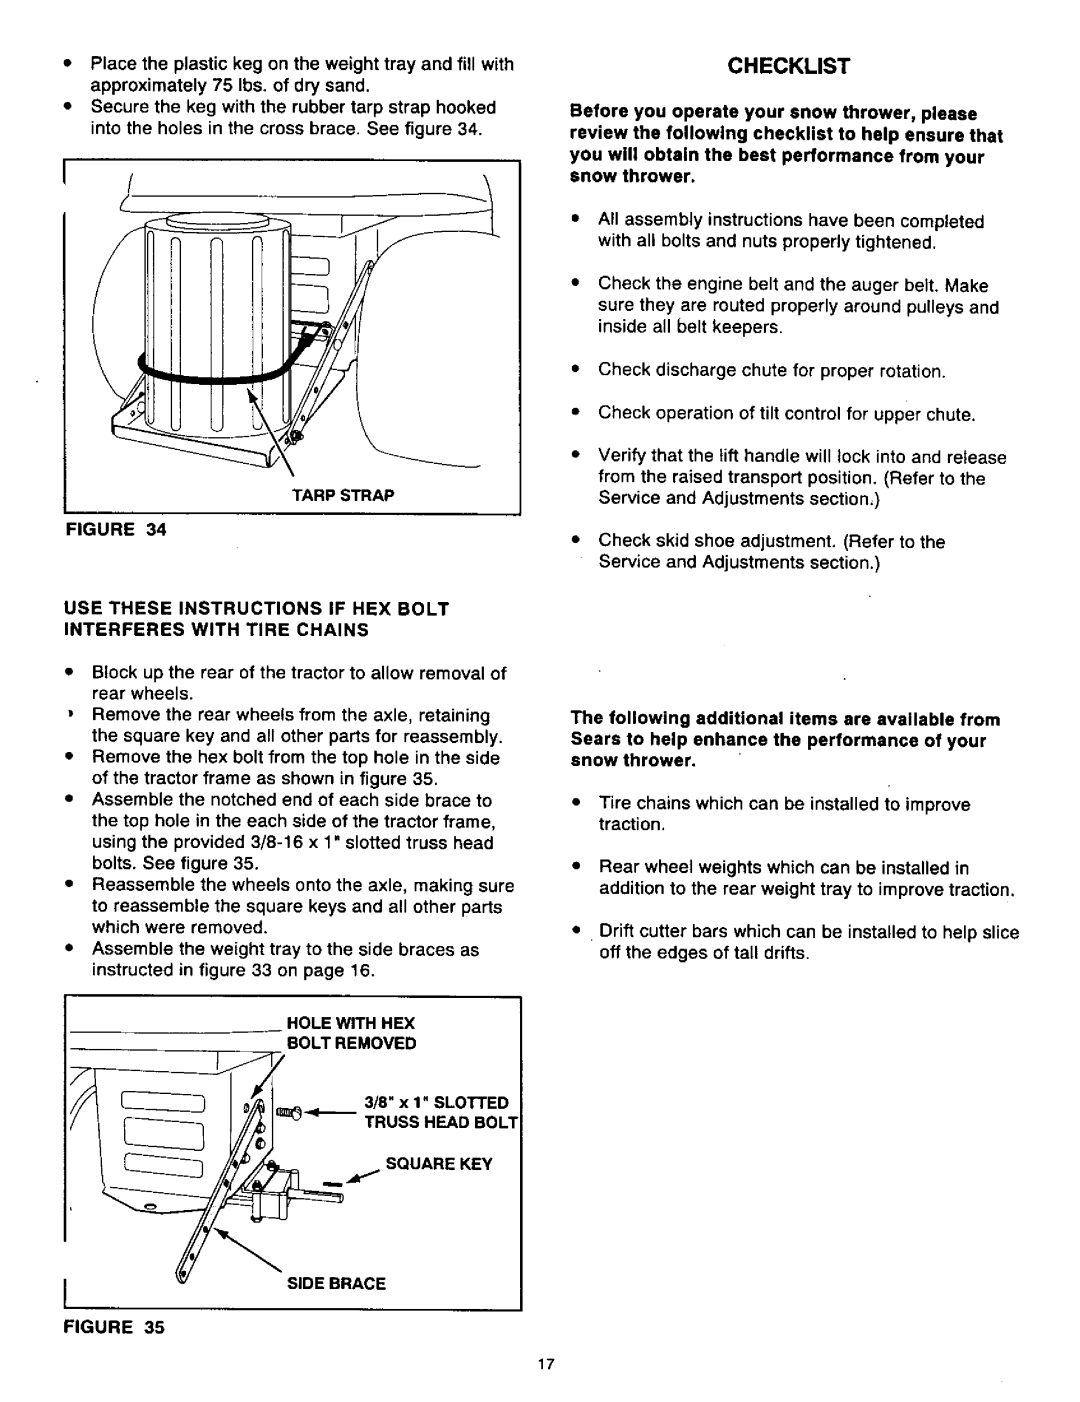 Craftsman 486.24839 owner manual Checklist, Hole with HEX Bolt Removed Truss Head Bolt, X 1 Slotted, Side Brace 